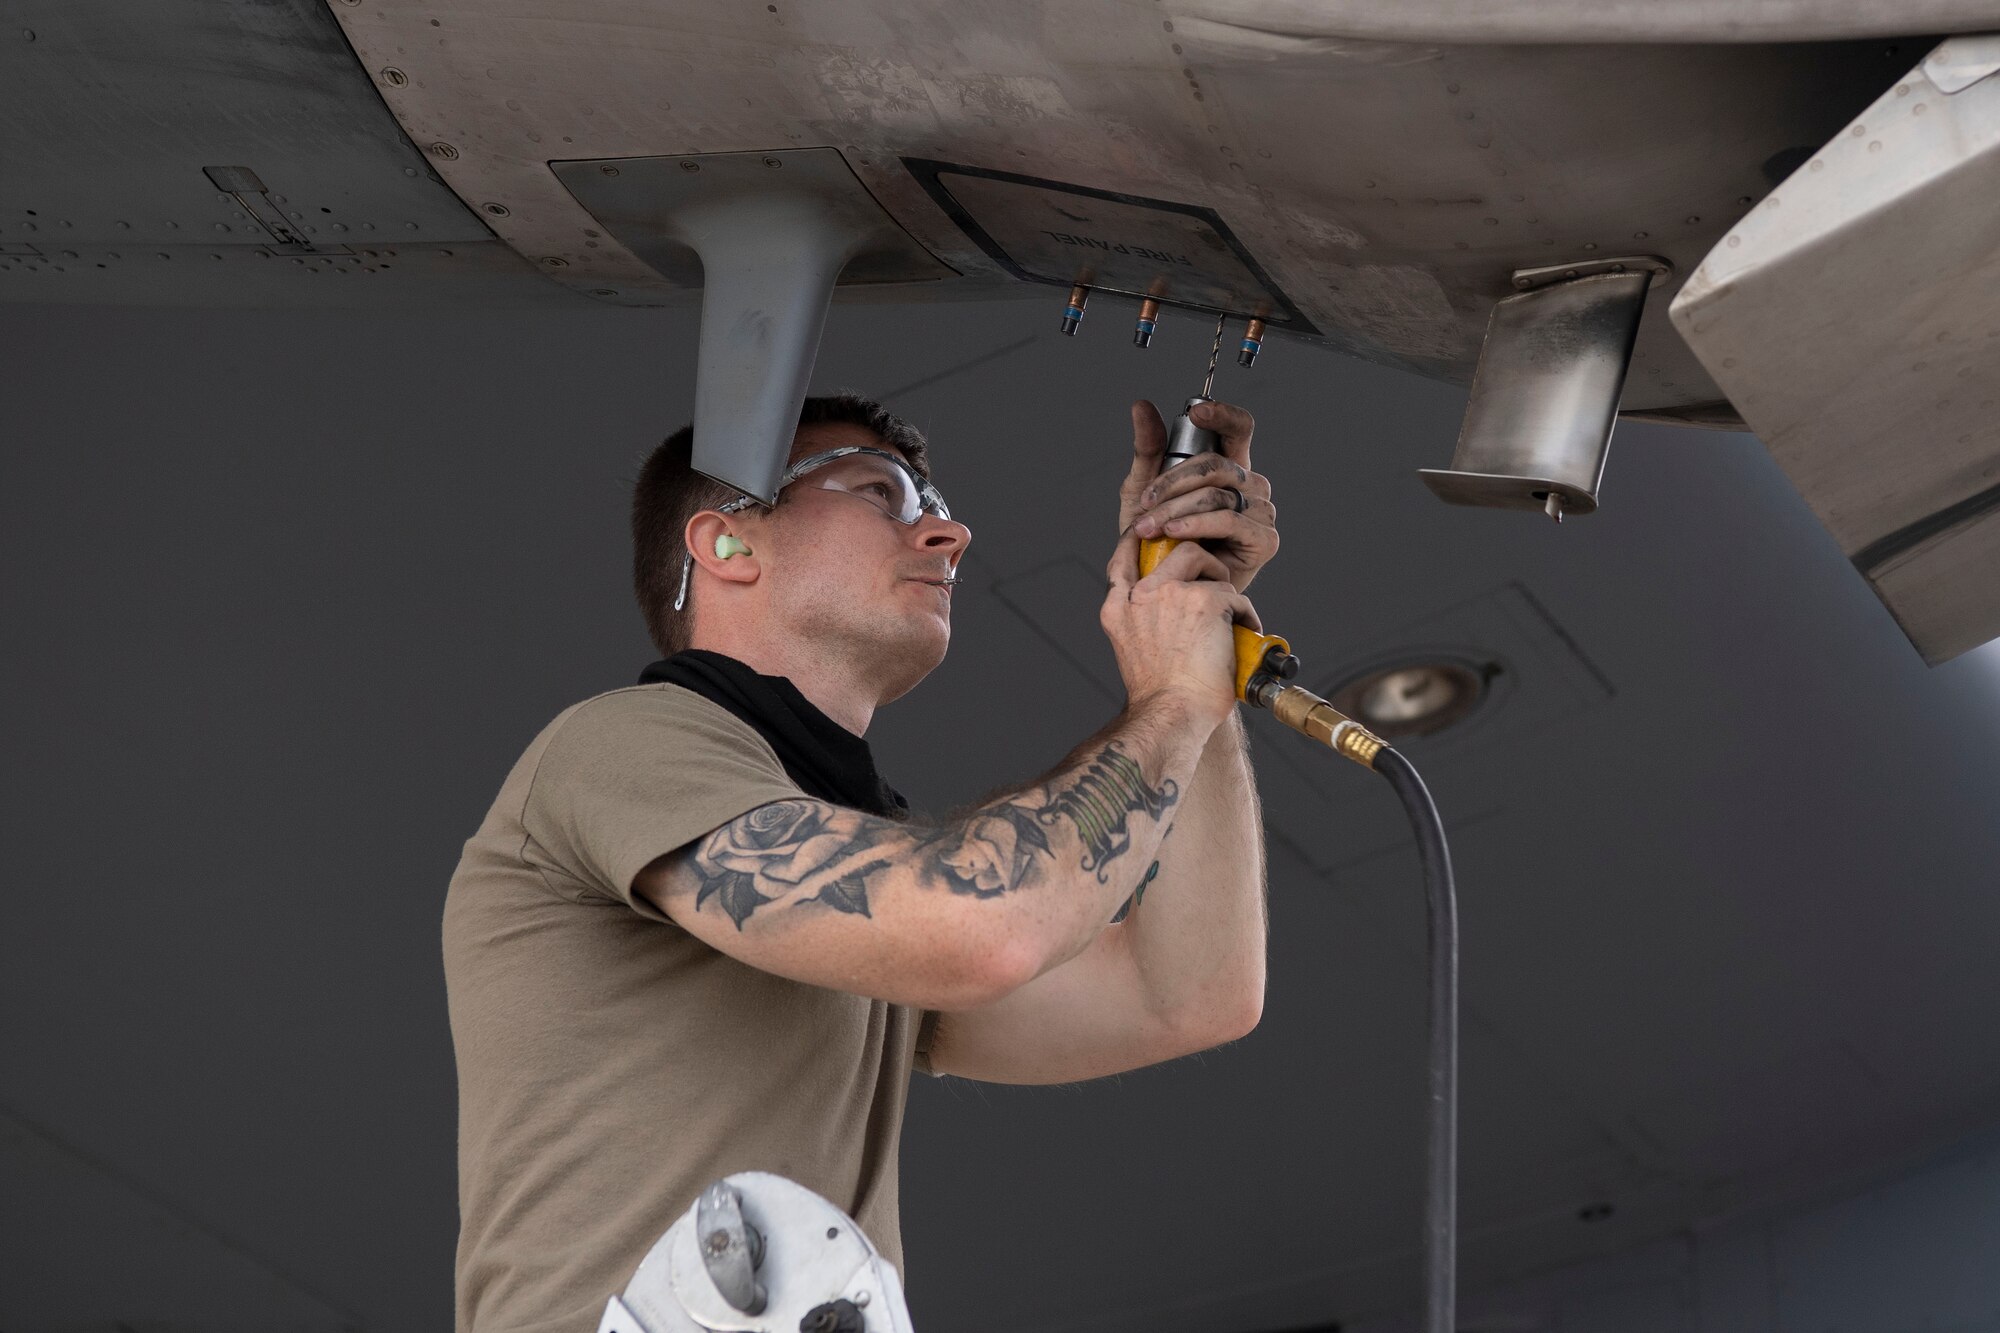 A maintainer from the 19th Aircraft Maintenance Squadron services a C-130J Super Hercules during pre-deployment training at Montrose Regional Airport, Colorado, July 27, 2020. This training is part of the 4/12 deployment initiative, which was developed in 2019 between airlift squadrons from Dyess Air Force Base, Texas and Little Rock AFB, allowing each squadron a full year of dwell time followed by a four-month rotation to their respective area of responsibility. (U.S. Air Force photo by Airman 1st Class Aaron Irvin)